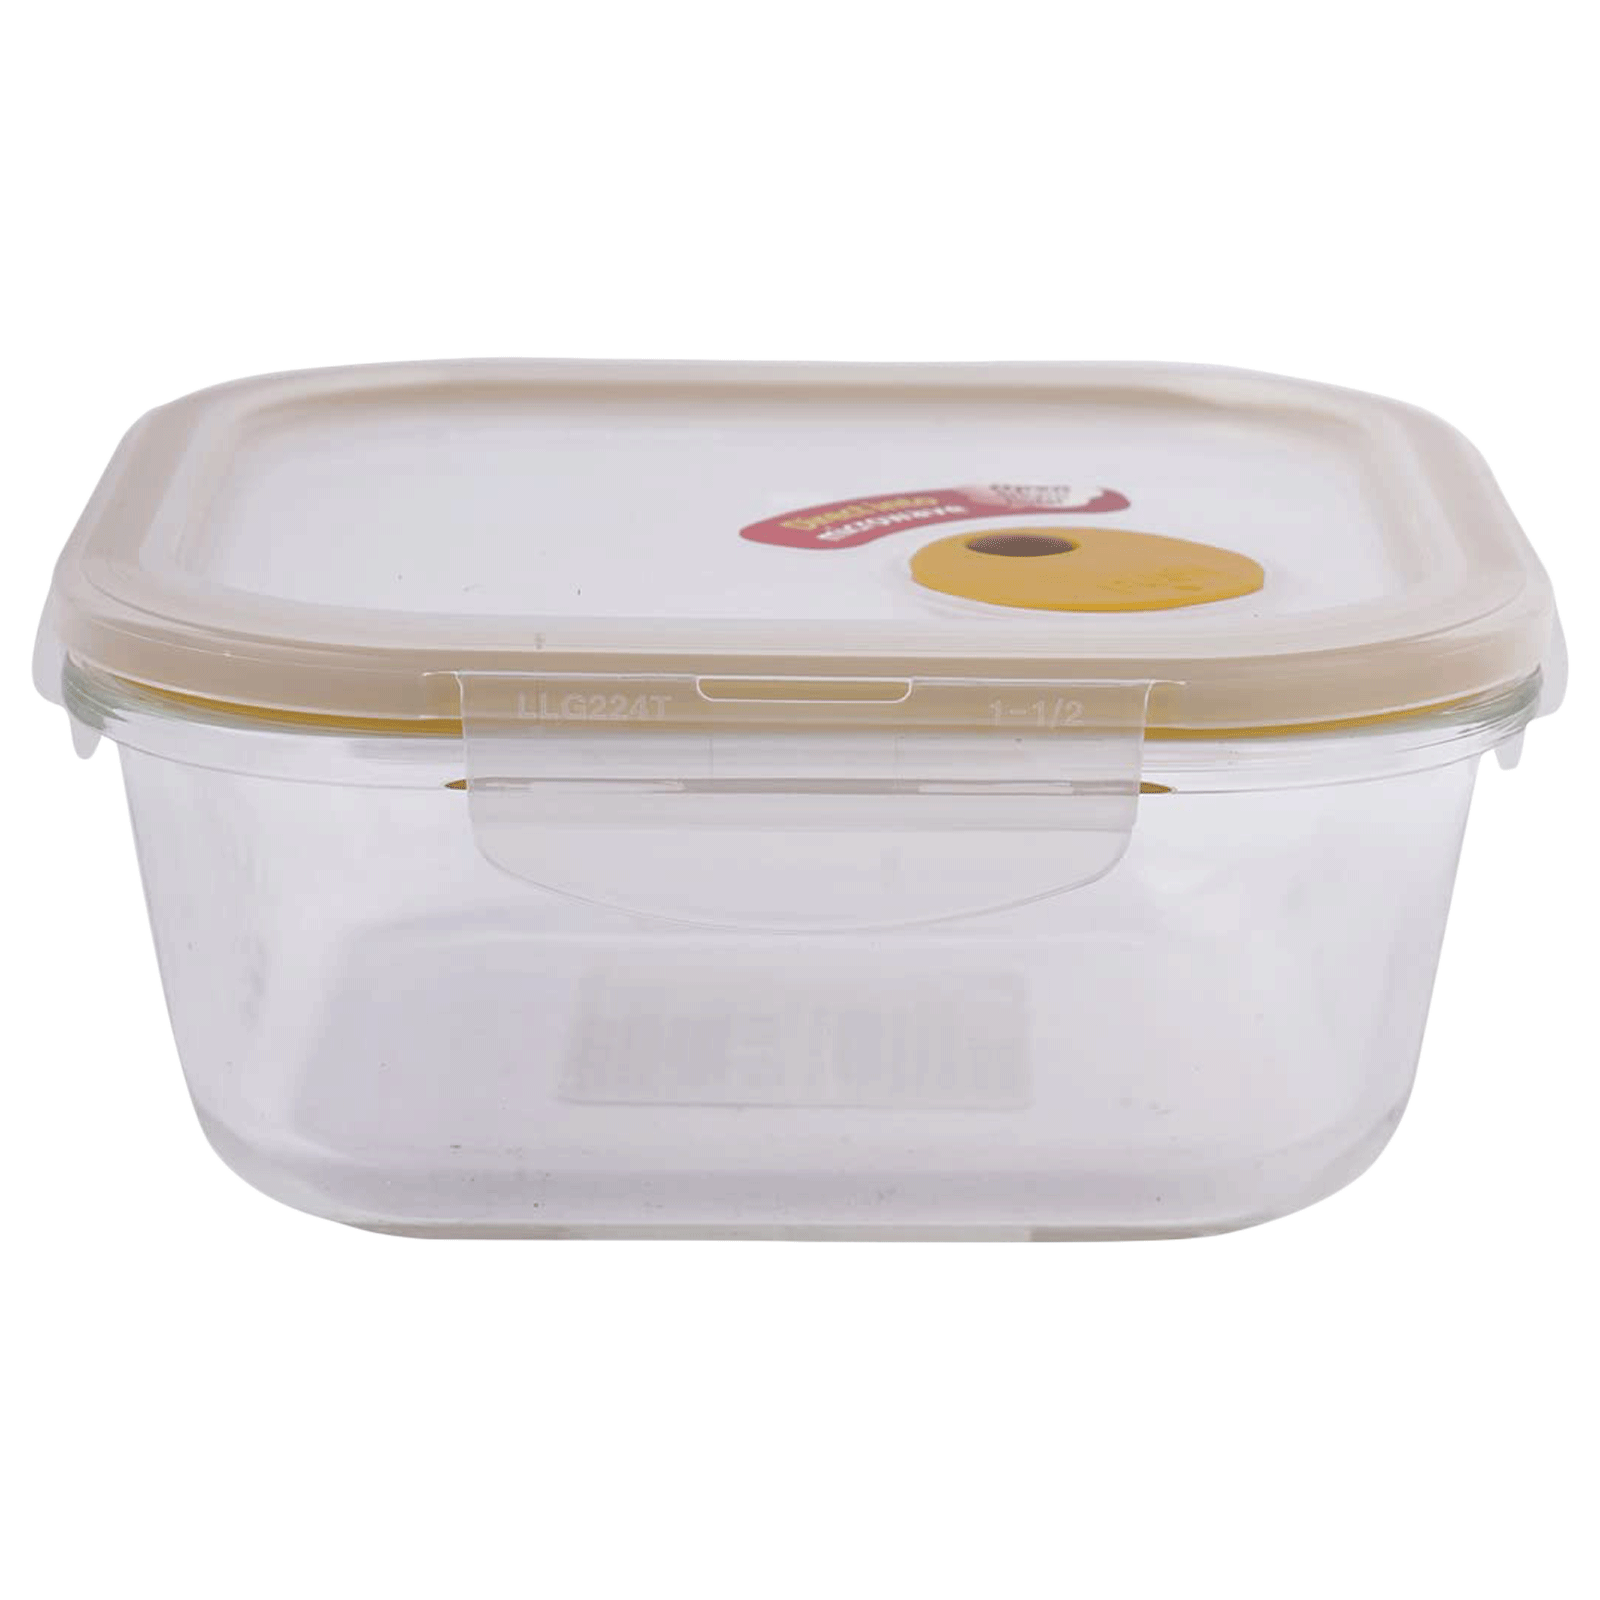 Lock & Lock Ovenglass 750 ml Square Glass Storage Container (Steam Hole, LLG224T, Transparent)_1